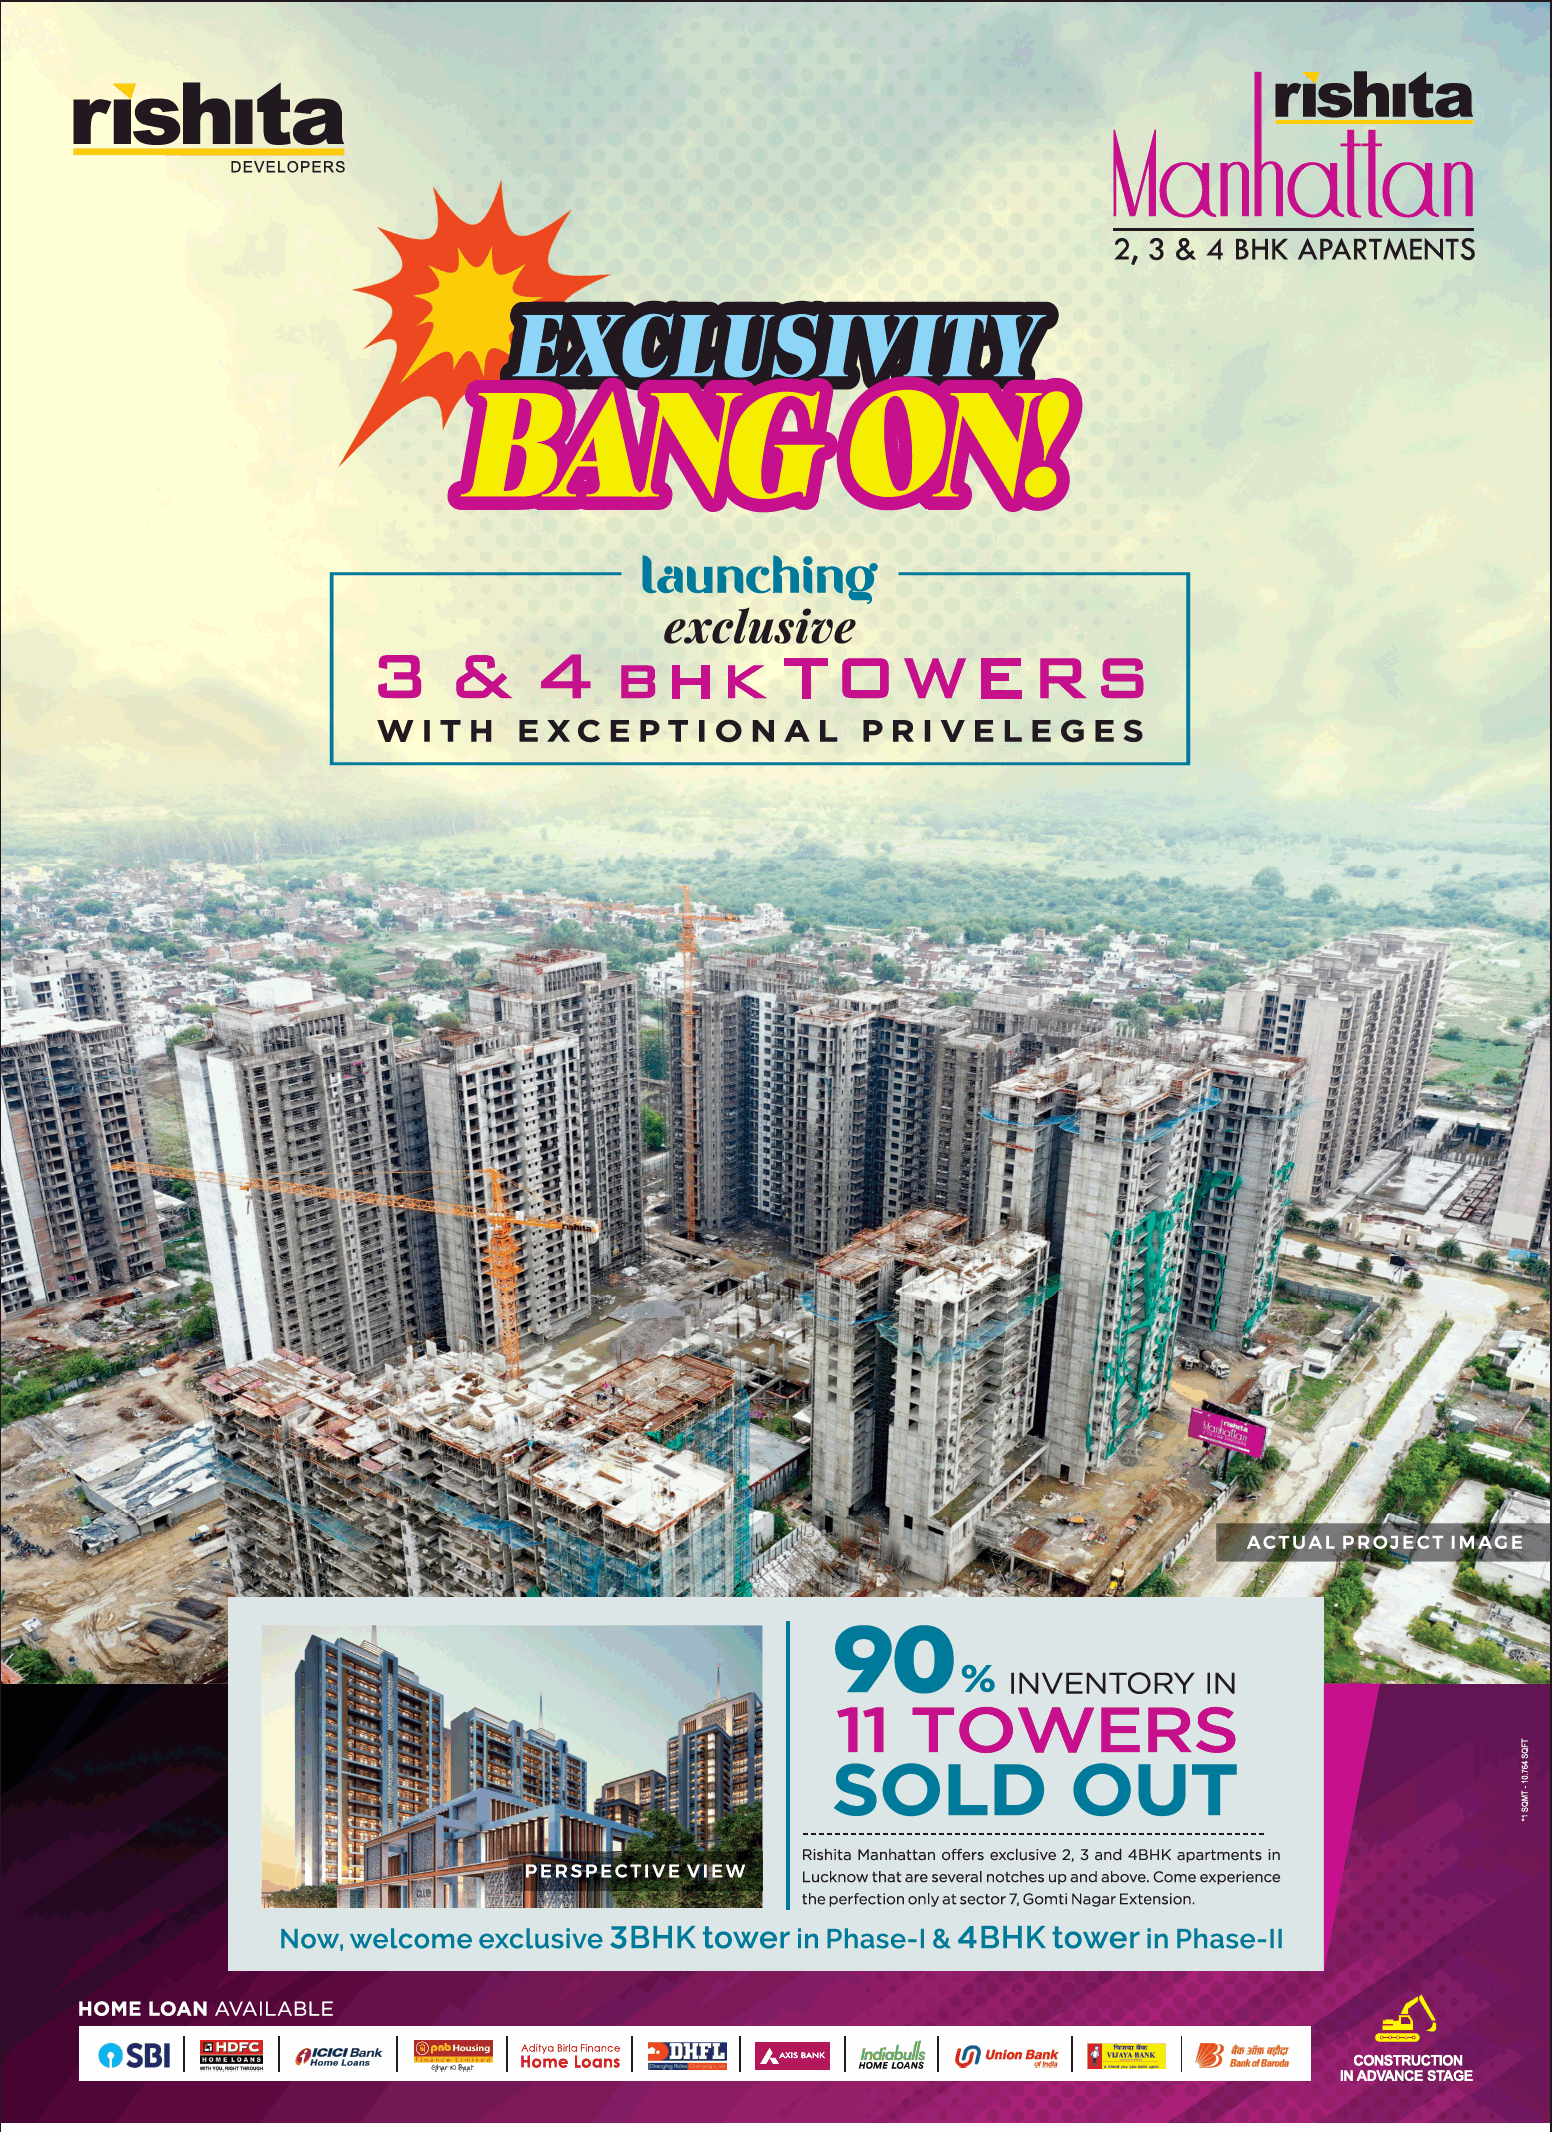 Hurry up 90% inventory in 11 towers sold out at Rishita Manhattan in Lucknow Update